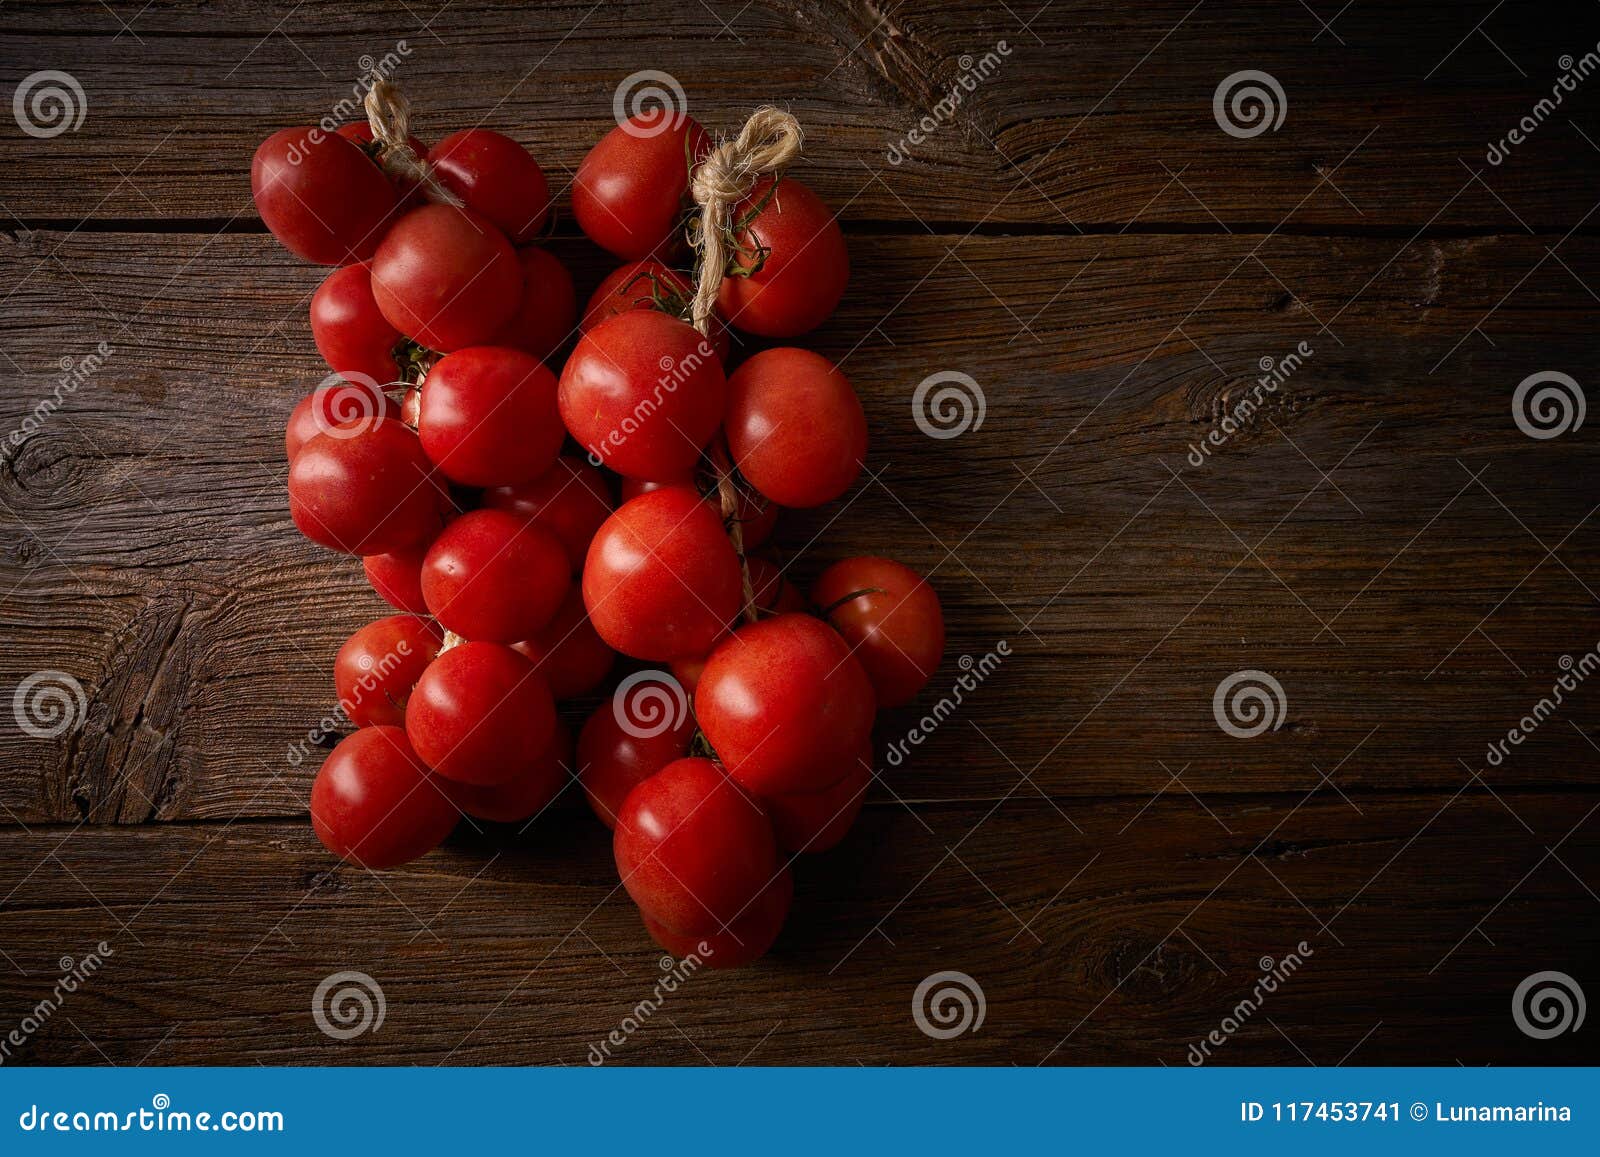 hanging tomatoes de colgar from catalonia